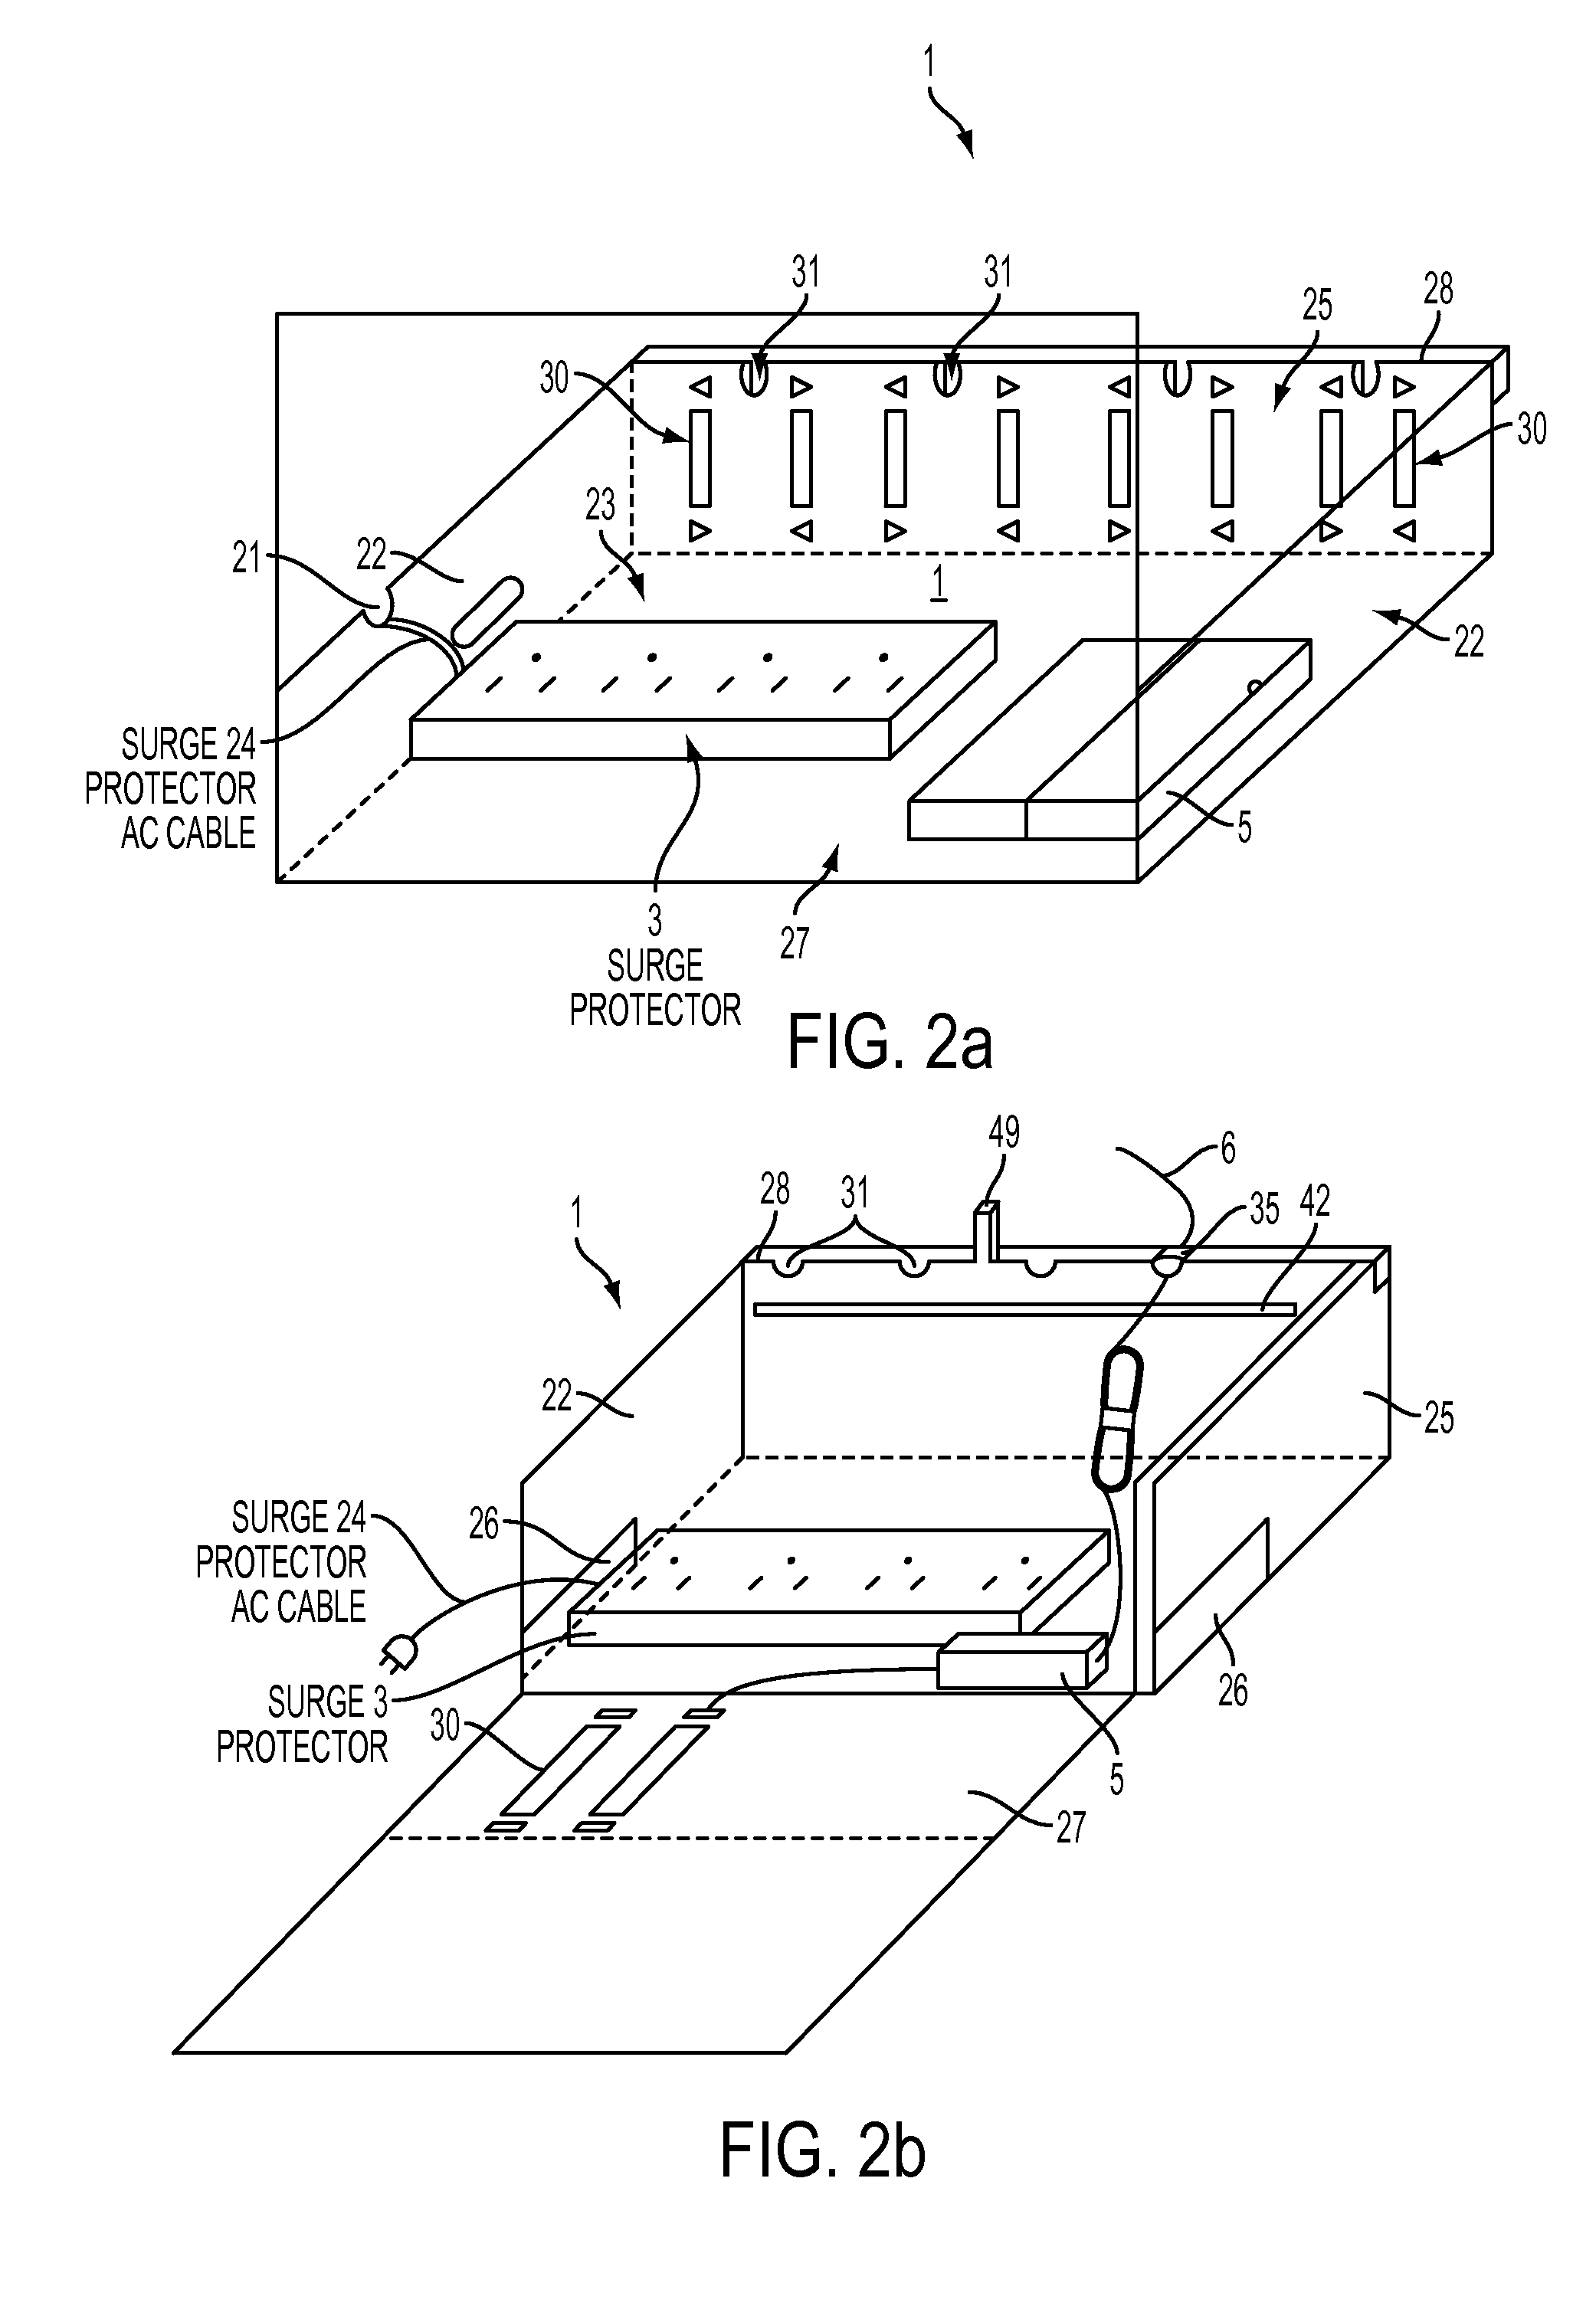 System and Apparatus For Managing and Organizing Electrical Cords and Cables